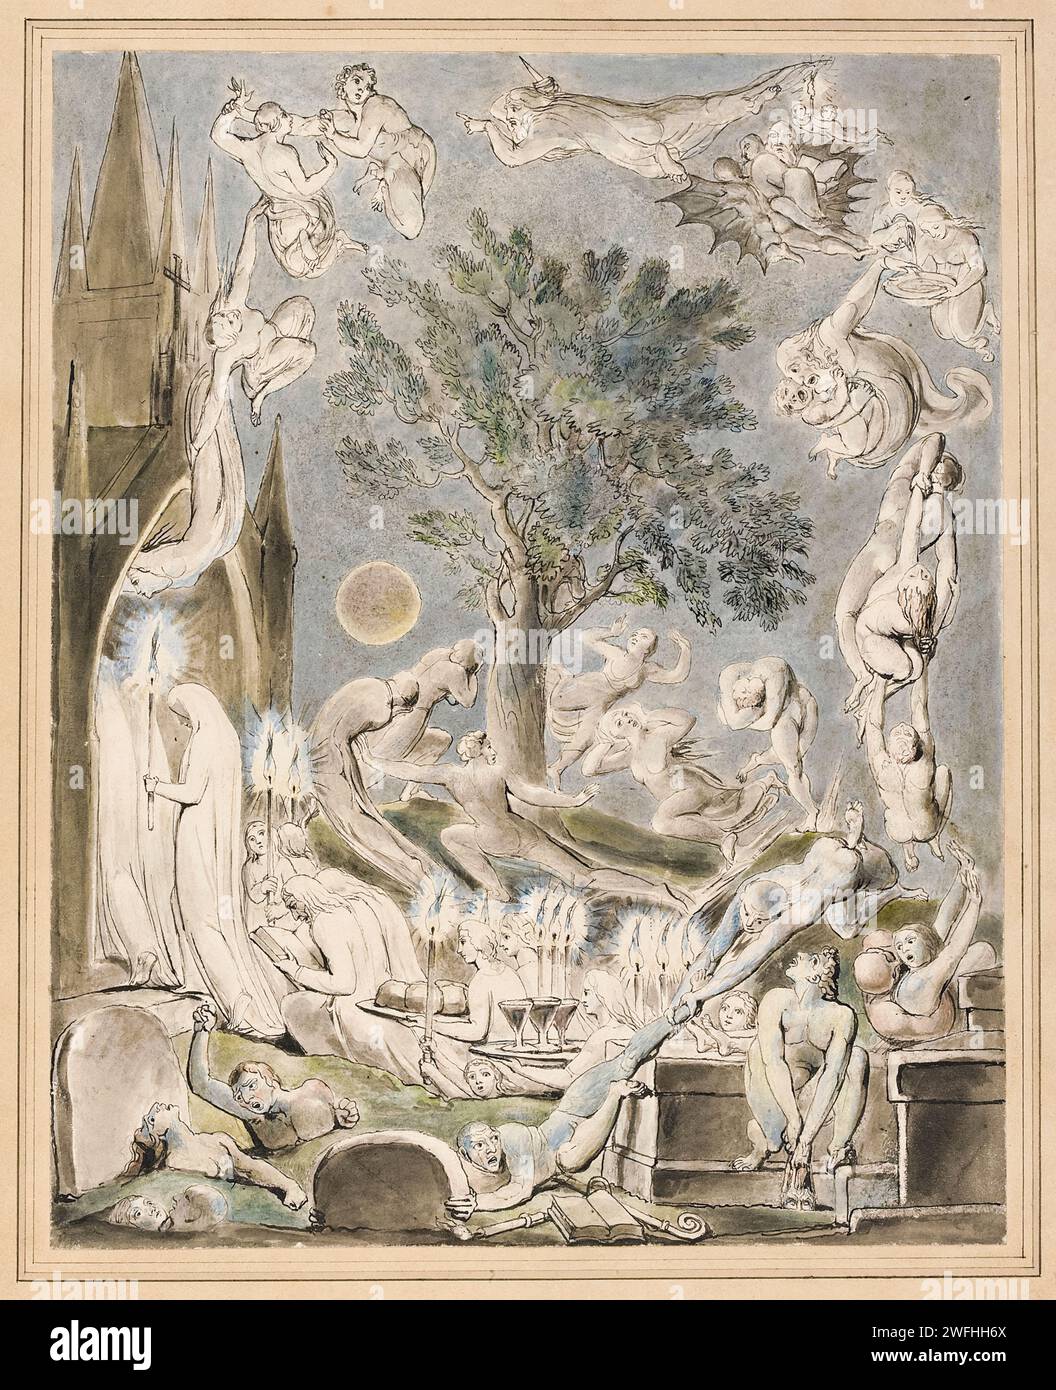 ‘The Gambols of Ghosts according with their Affections previous to the Final Judgement’ 1805 watercolour by William Blake (1757-1827) commissioned by Robert Cromek (1770–1812) to illustrate his edition of ‘The Grave’ by poet Robert Blair published in 1808. Stock Photo